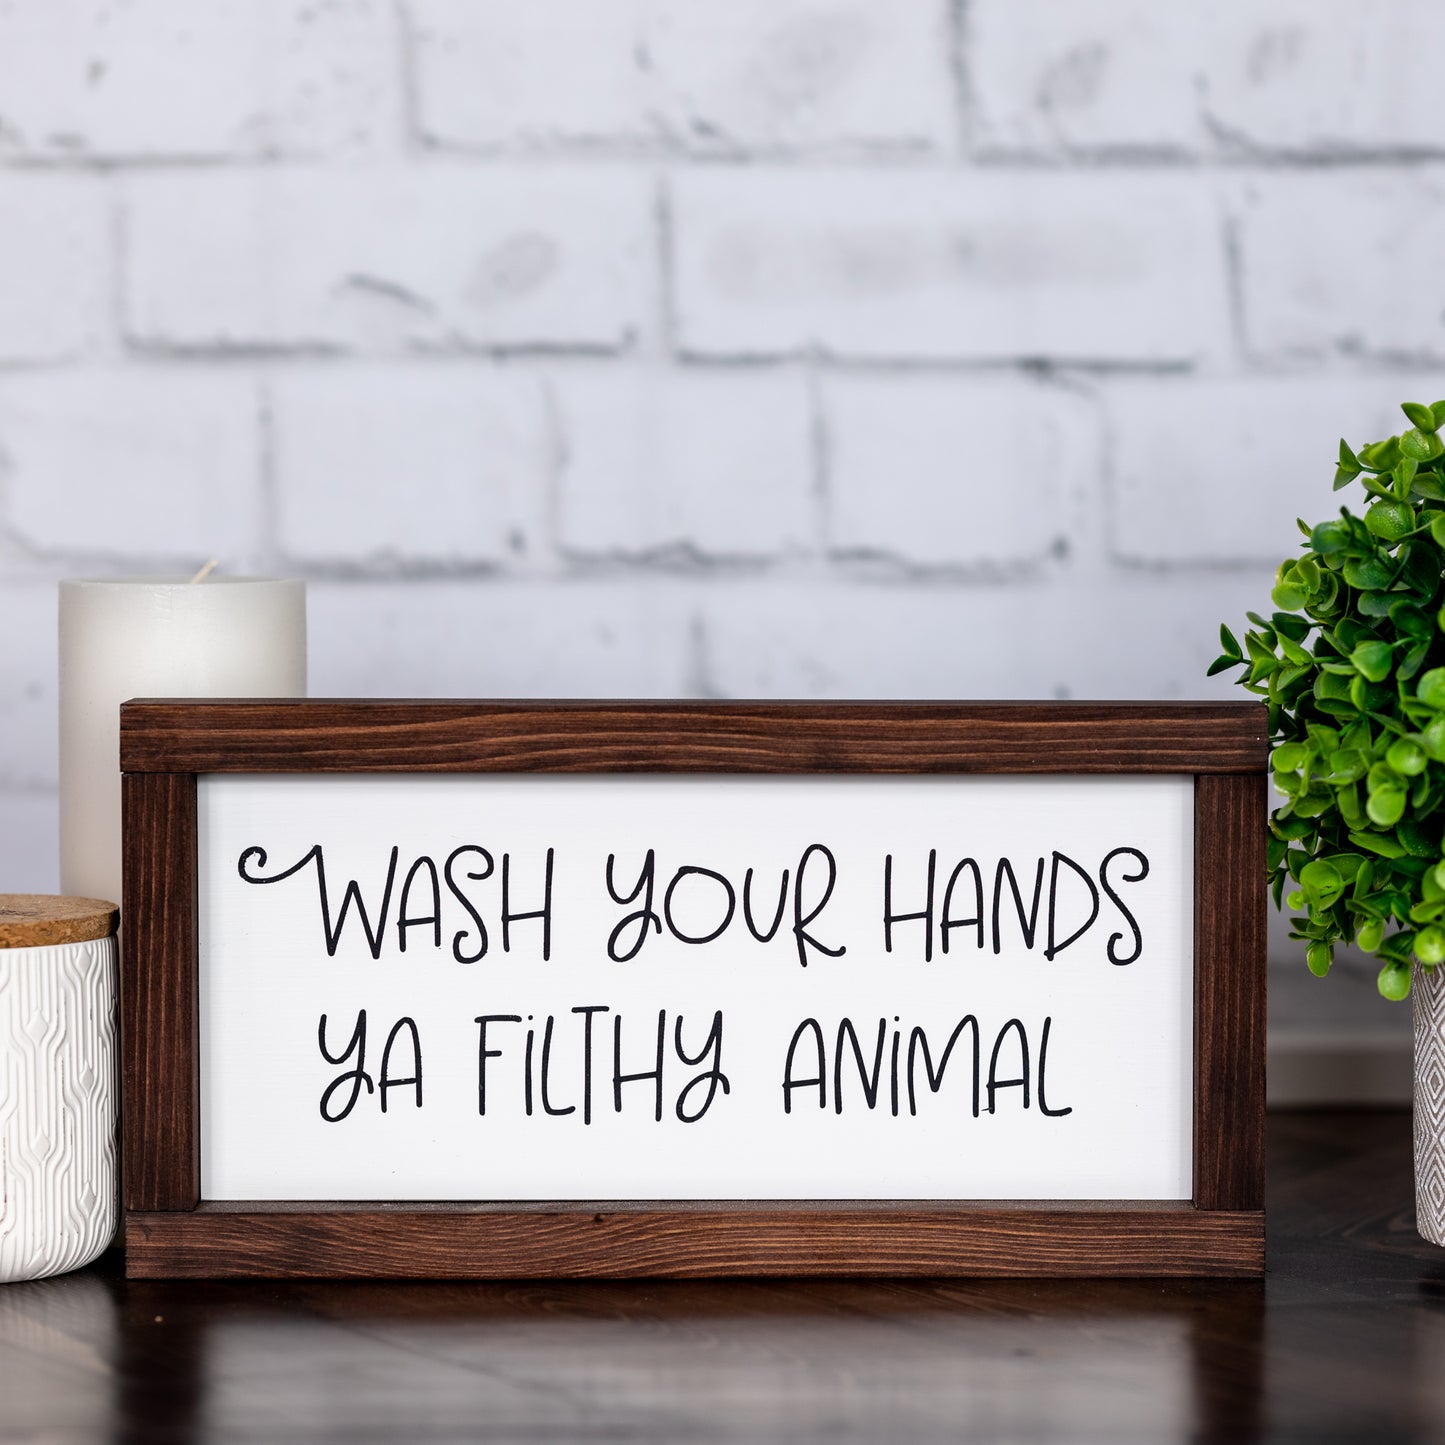 wash your hands ya filthy animal ~ wood sign